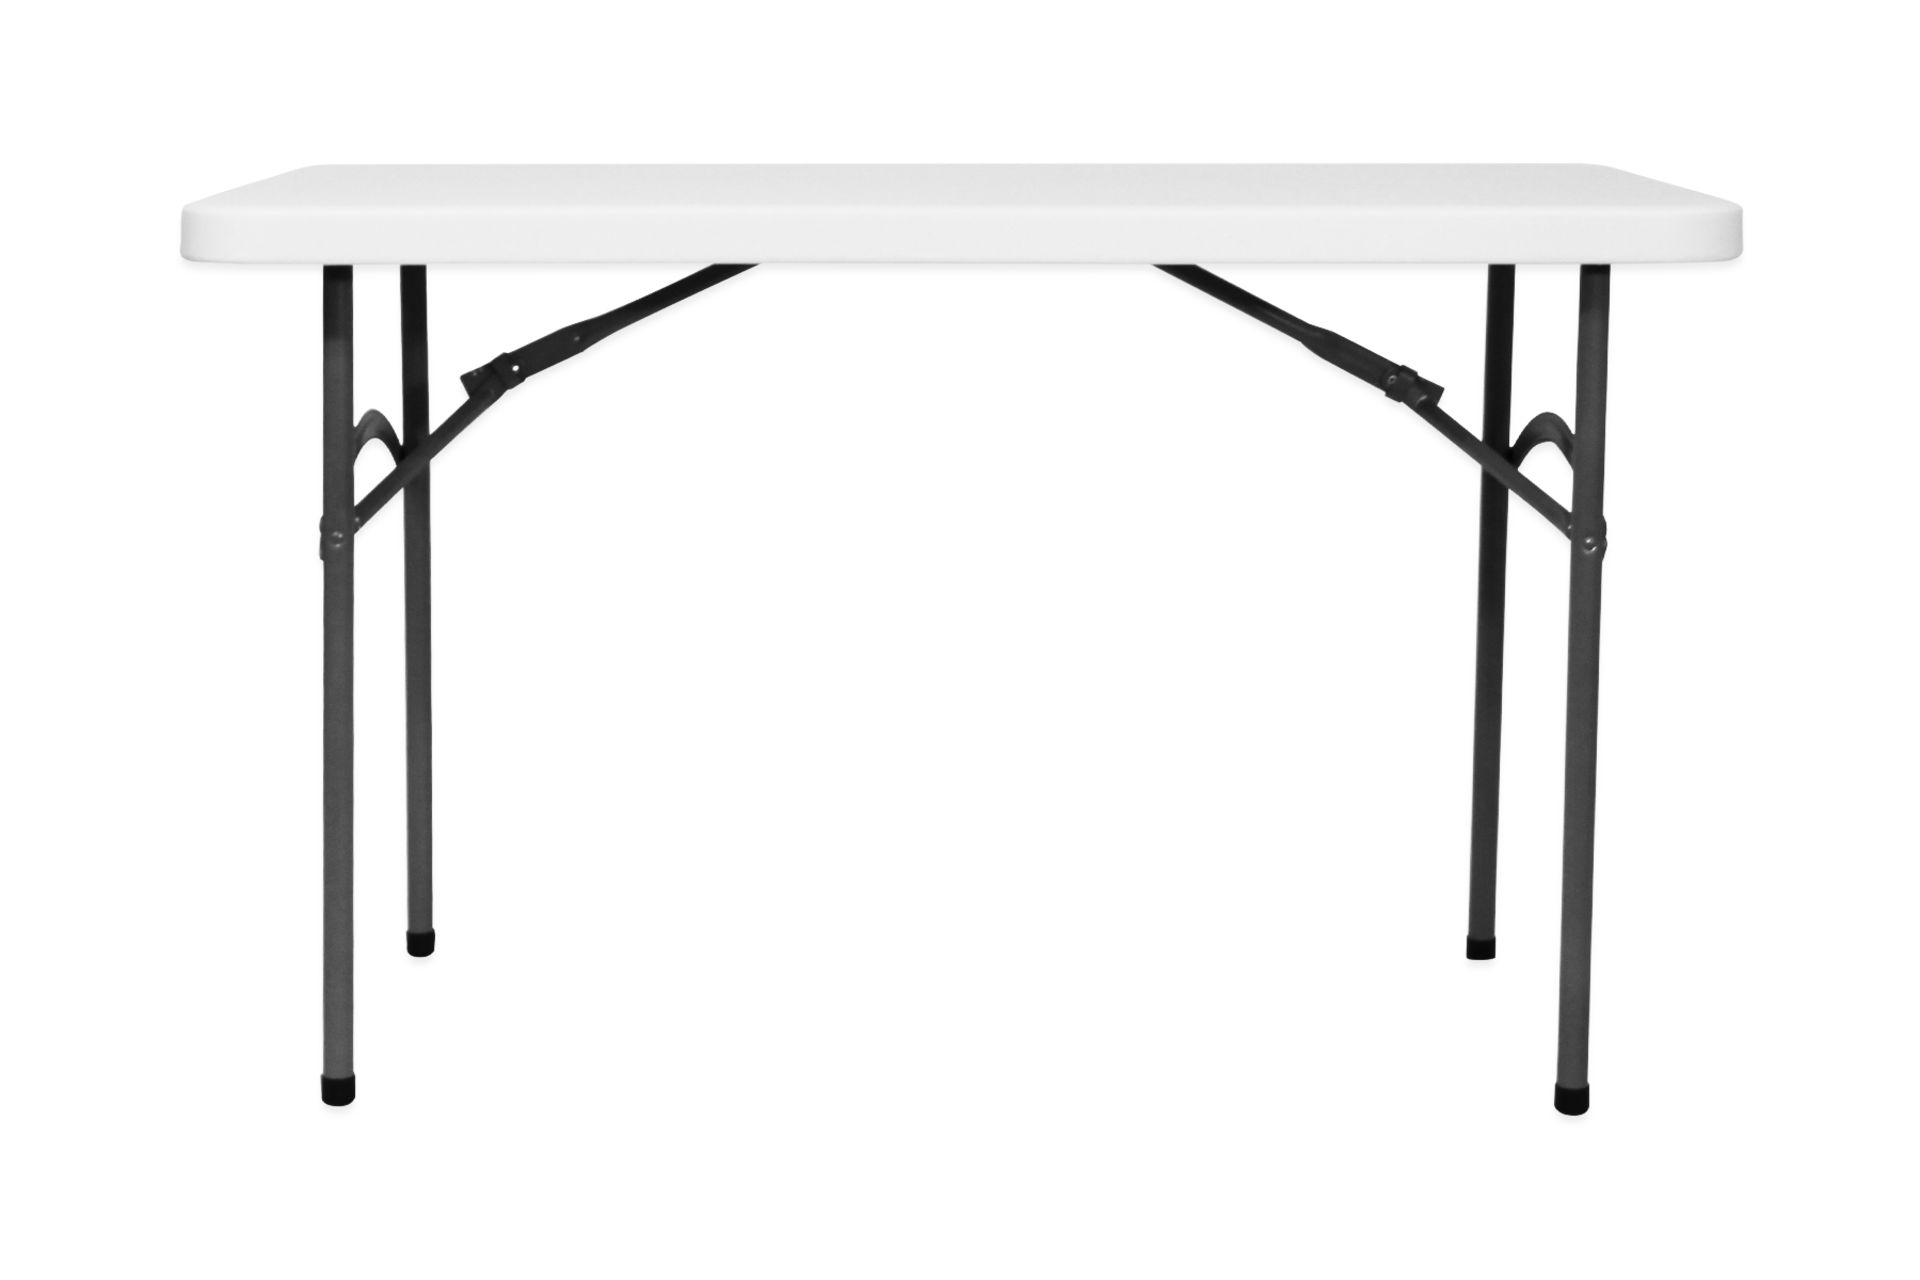 V *TRADE QTY* Grade A 4ft Plastic Trestle Table X250 YOUR BID PRICE TO BE MULTIPLIED BY TWO